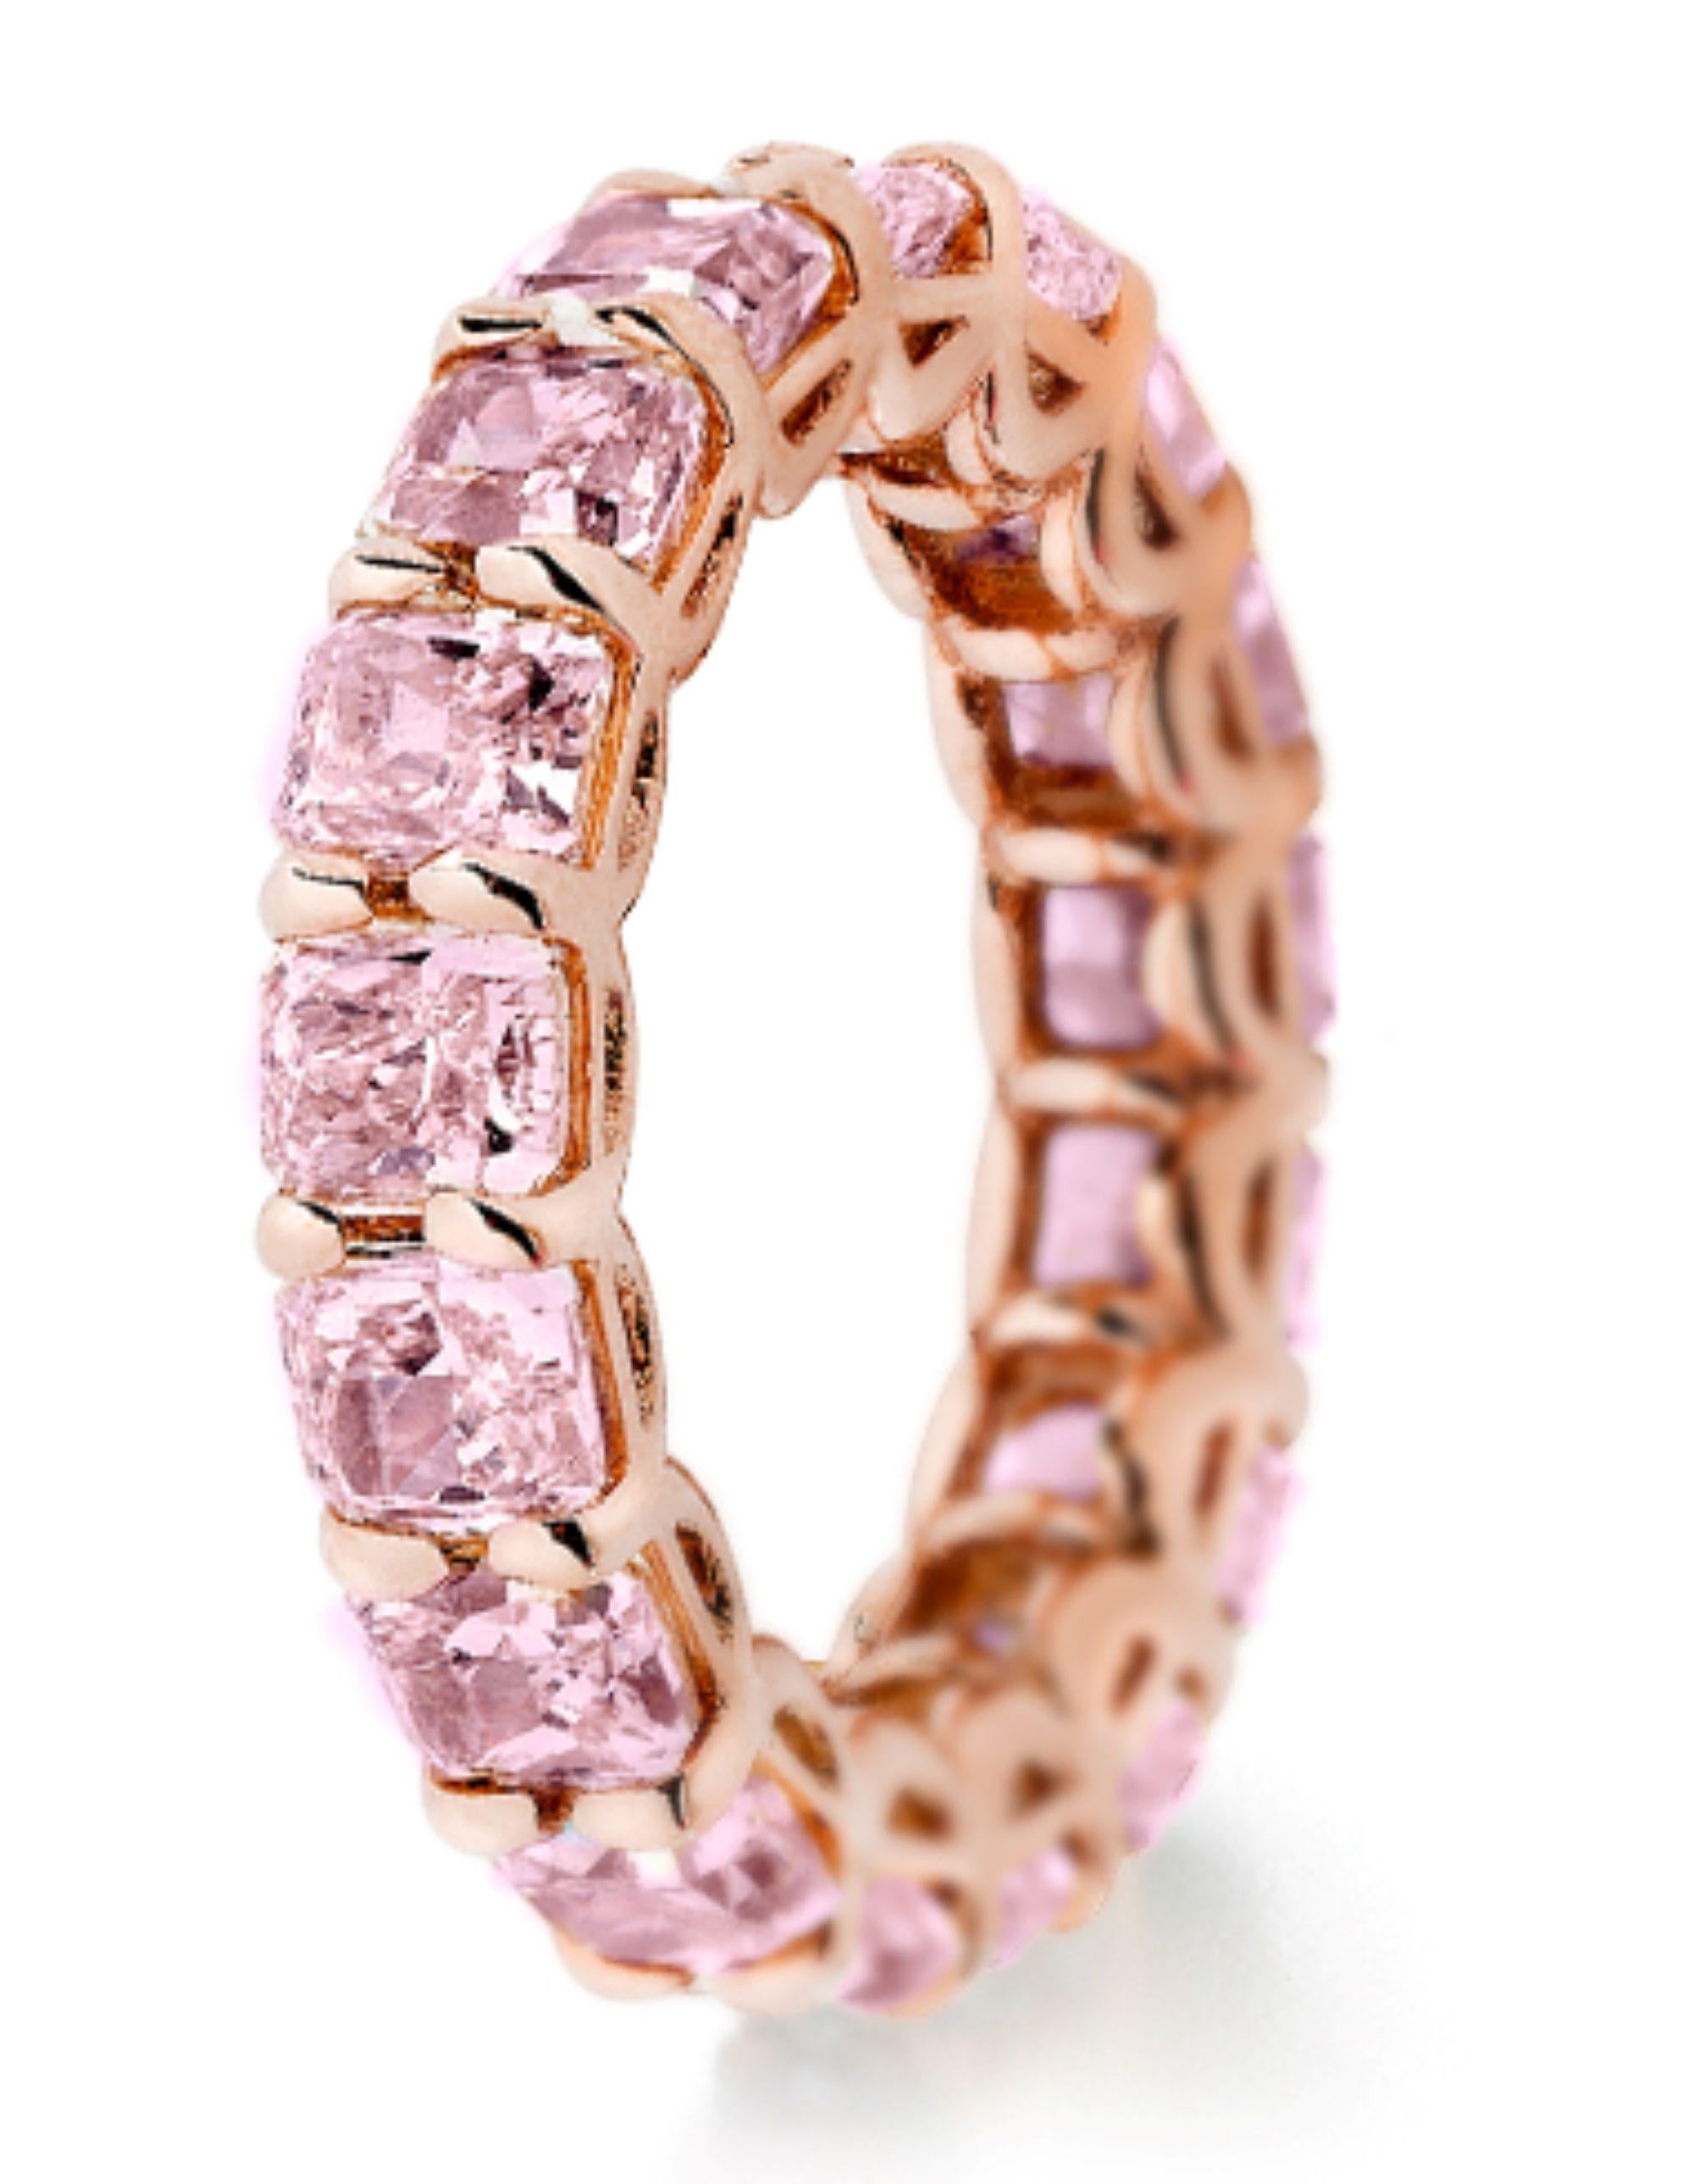 One of a Kind. 19 Matched Fancy Pink Radiant cut Diamonds weighing between 0.25-0.33 Carat each GIA certified.
Set in 18 Karat Rose Gold.

Only made by Special Order.